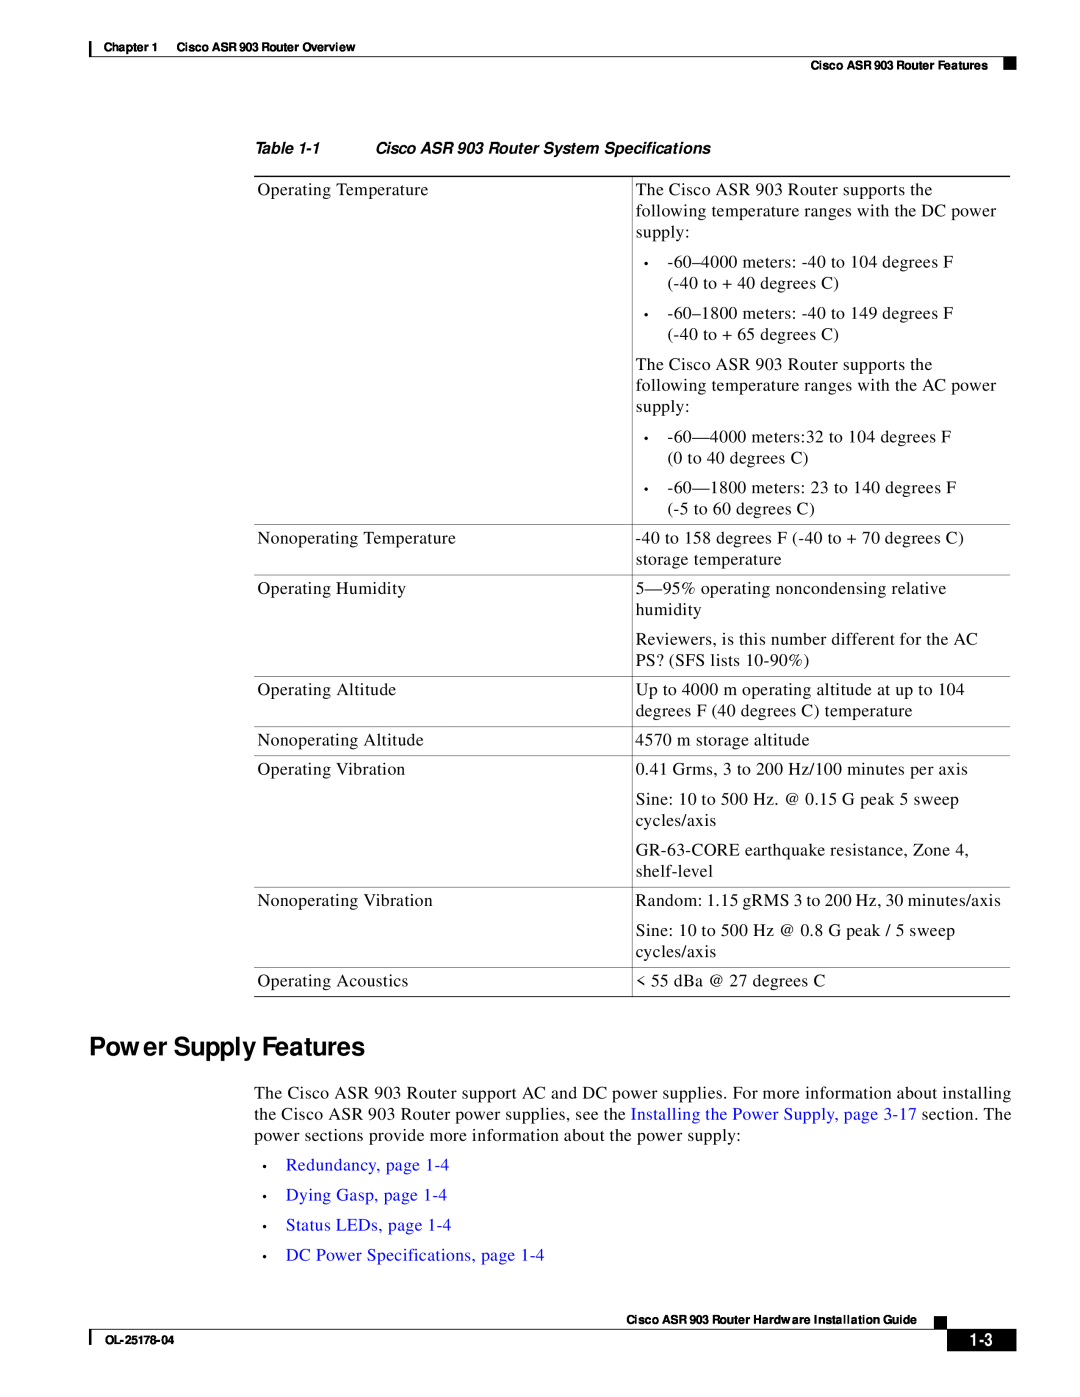 Cisco Systems ASR 903 manual Power Supply Features, Redundancy, page Dying Gasp, page Status LEDs, page 